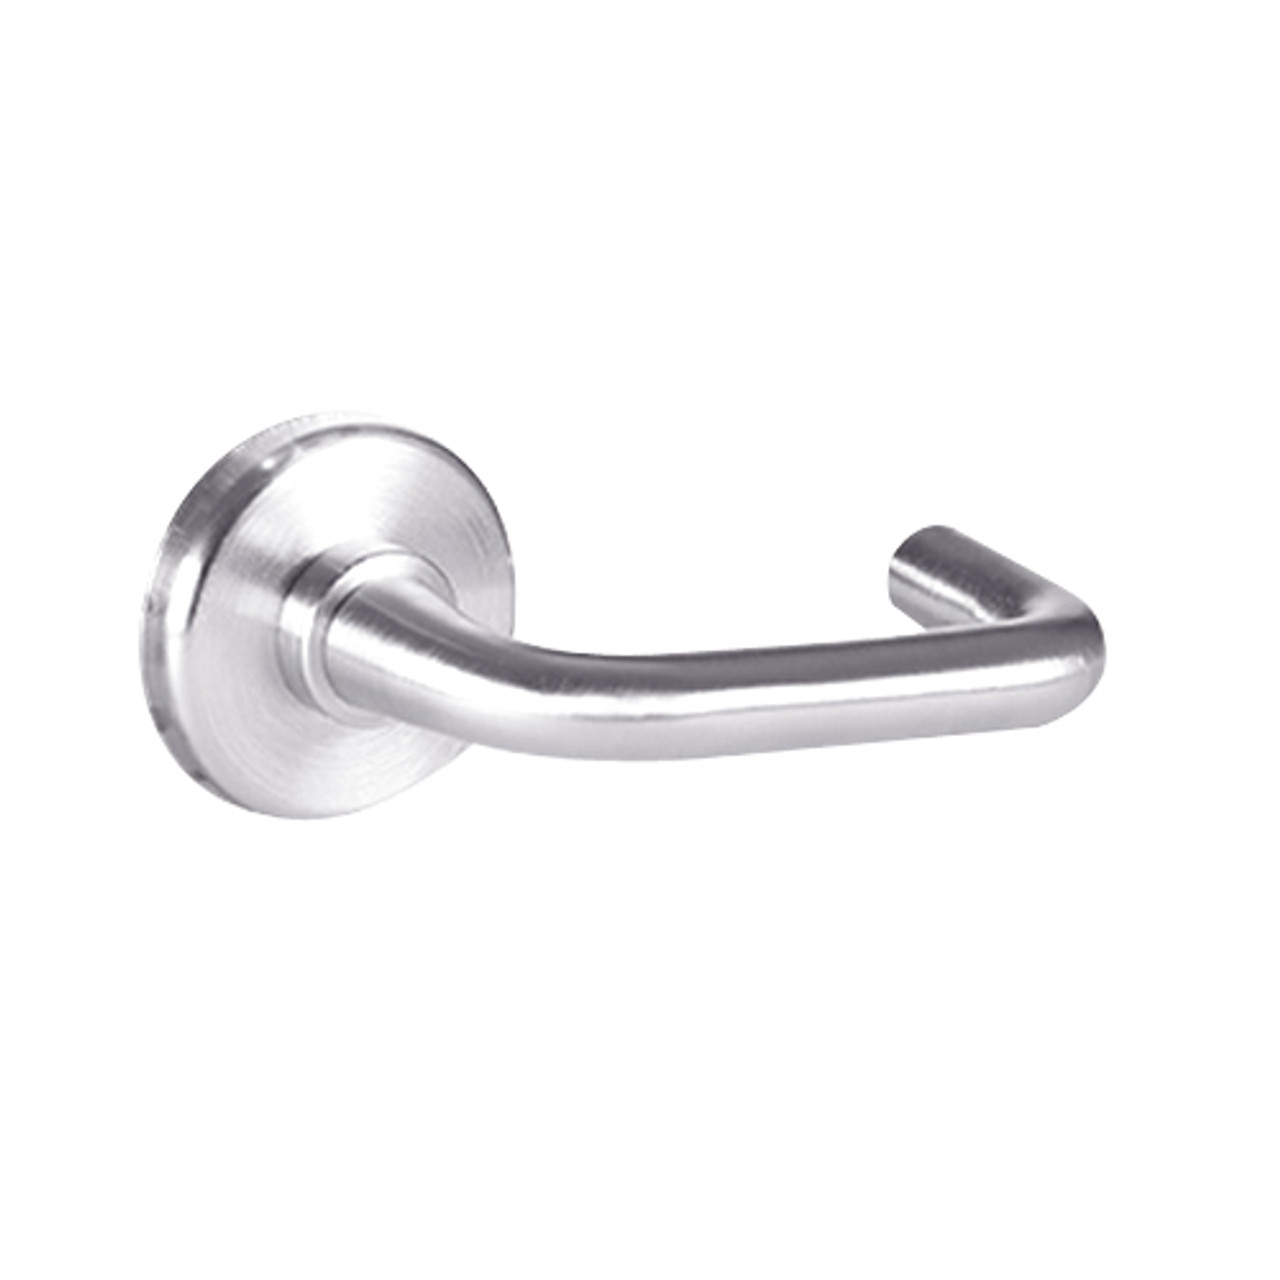 40HTKIS23S629 Best 40H Series Trim Kits Inside Lever w/ turn with Solid Tube-Return Trim Style in Bright Stainless Steel